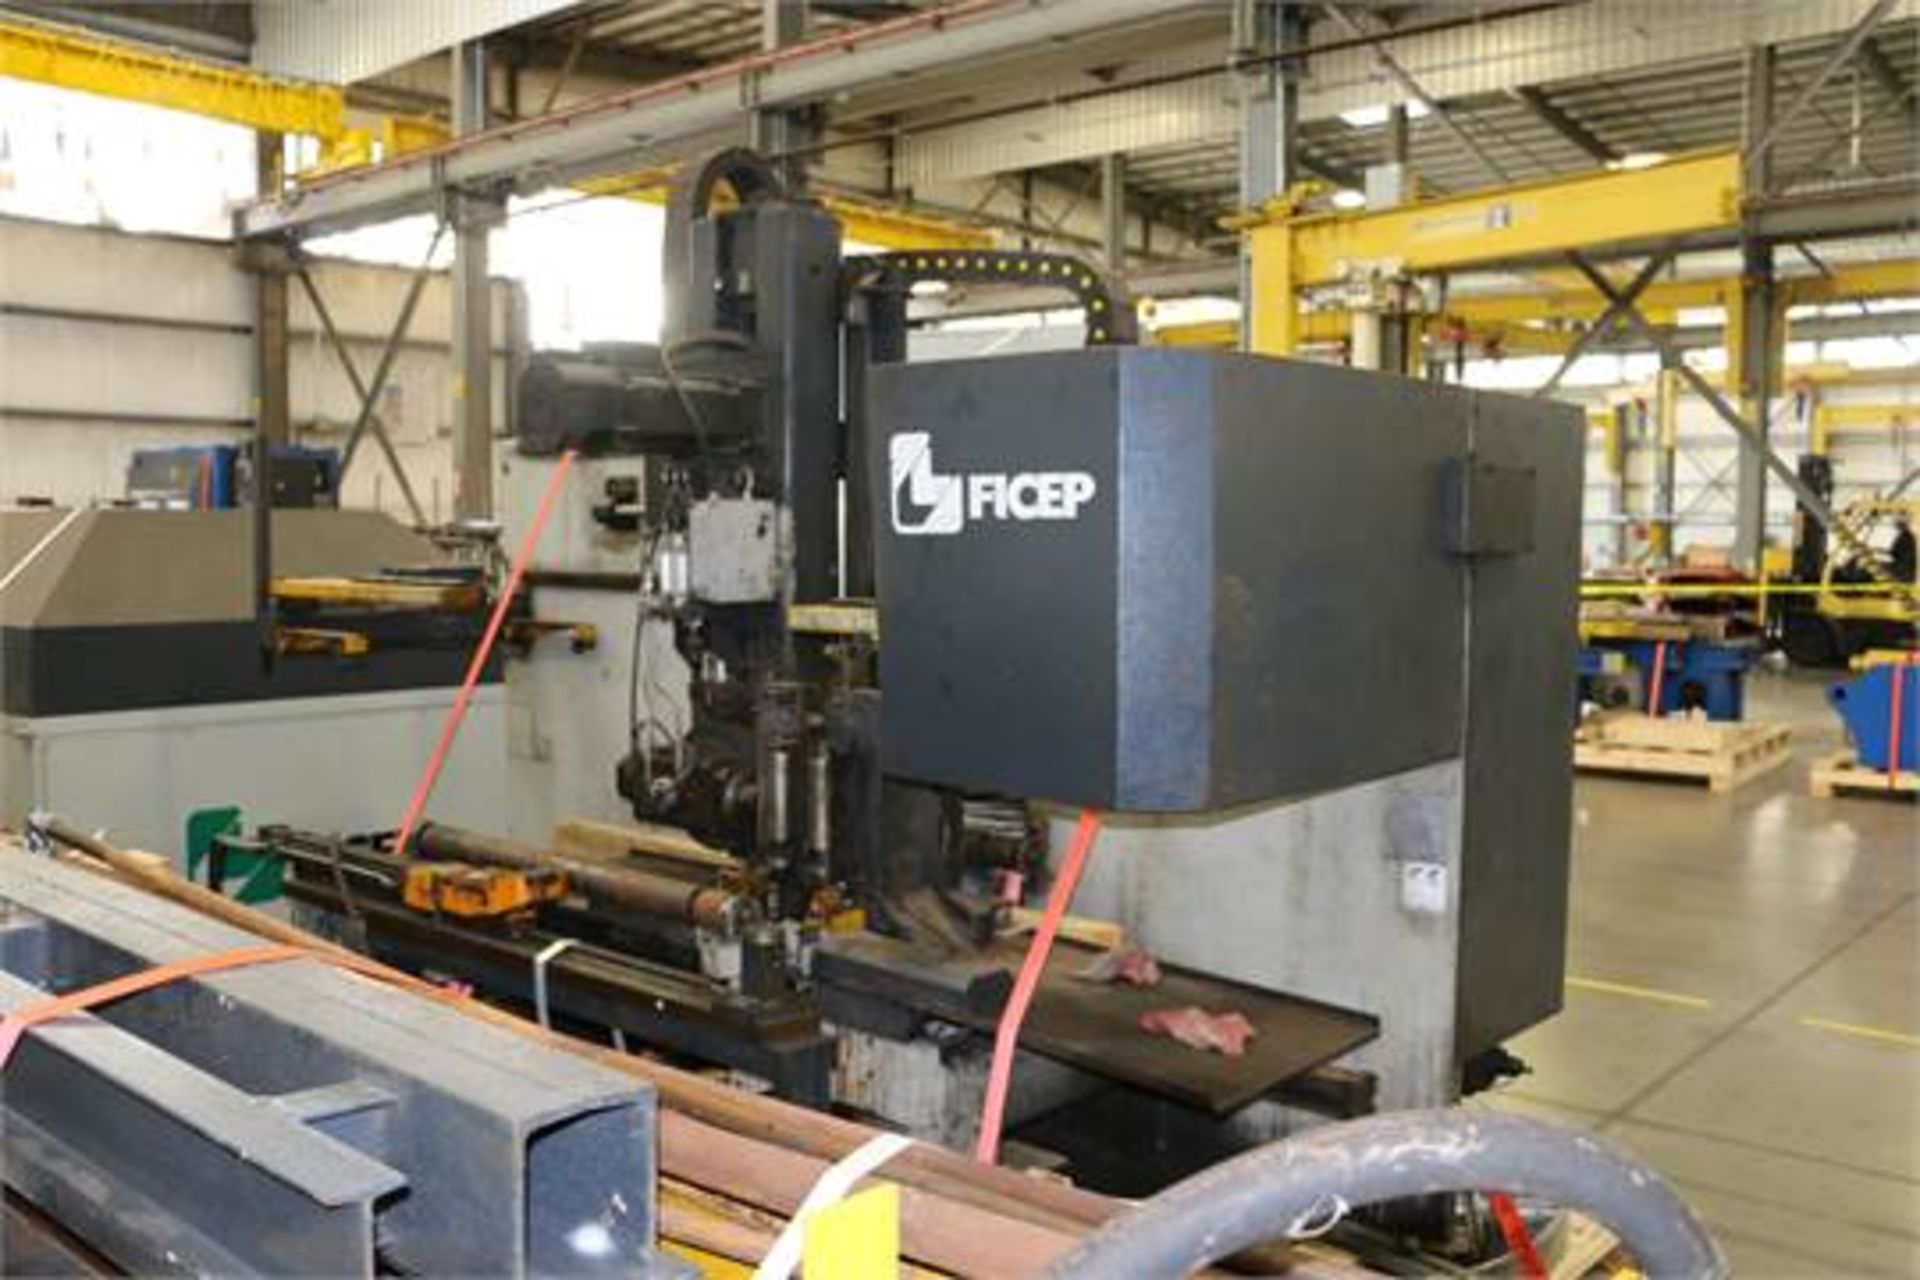 Ficep 1102-D2TT CNC Tandem Drill & Coping System, Siemens control, 36" capacity, 4-axis 20 HP drill, - Image 4 of 5